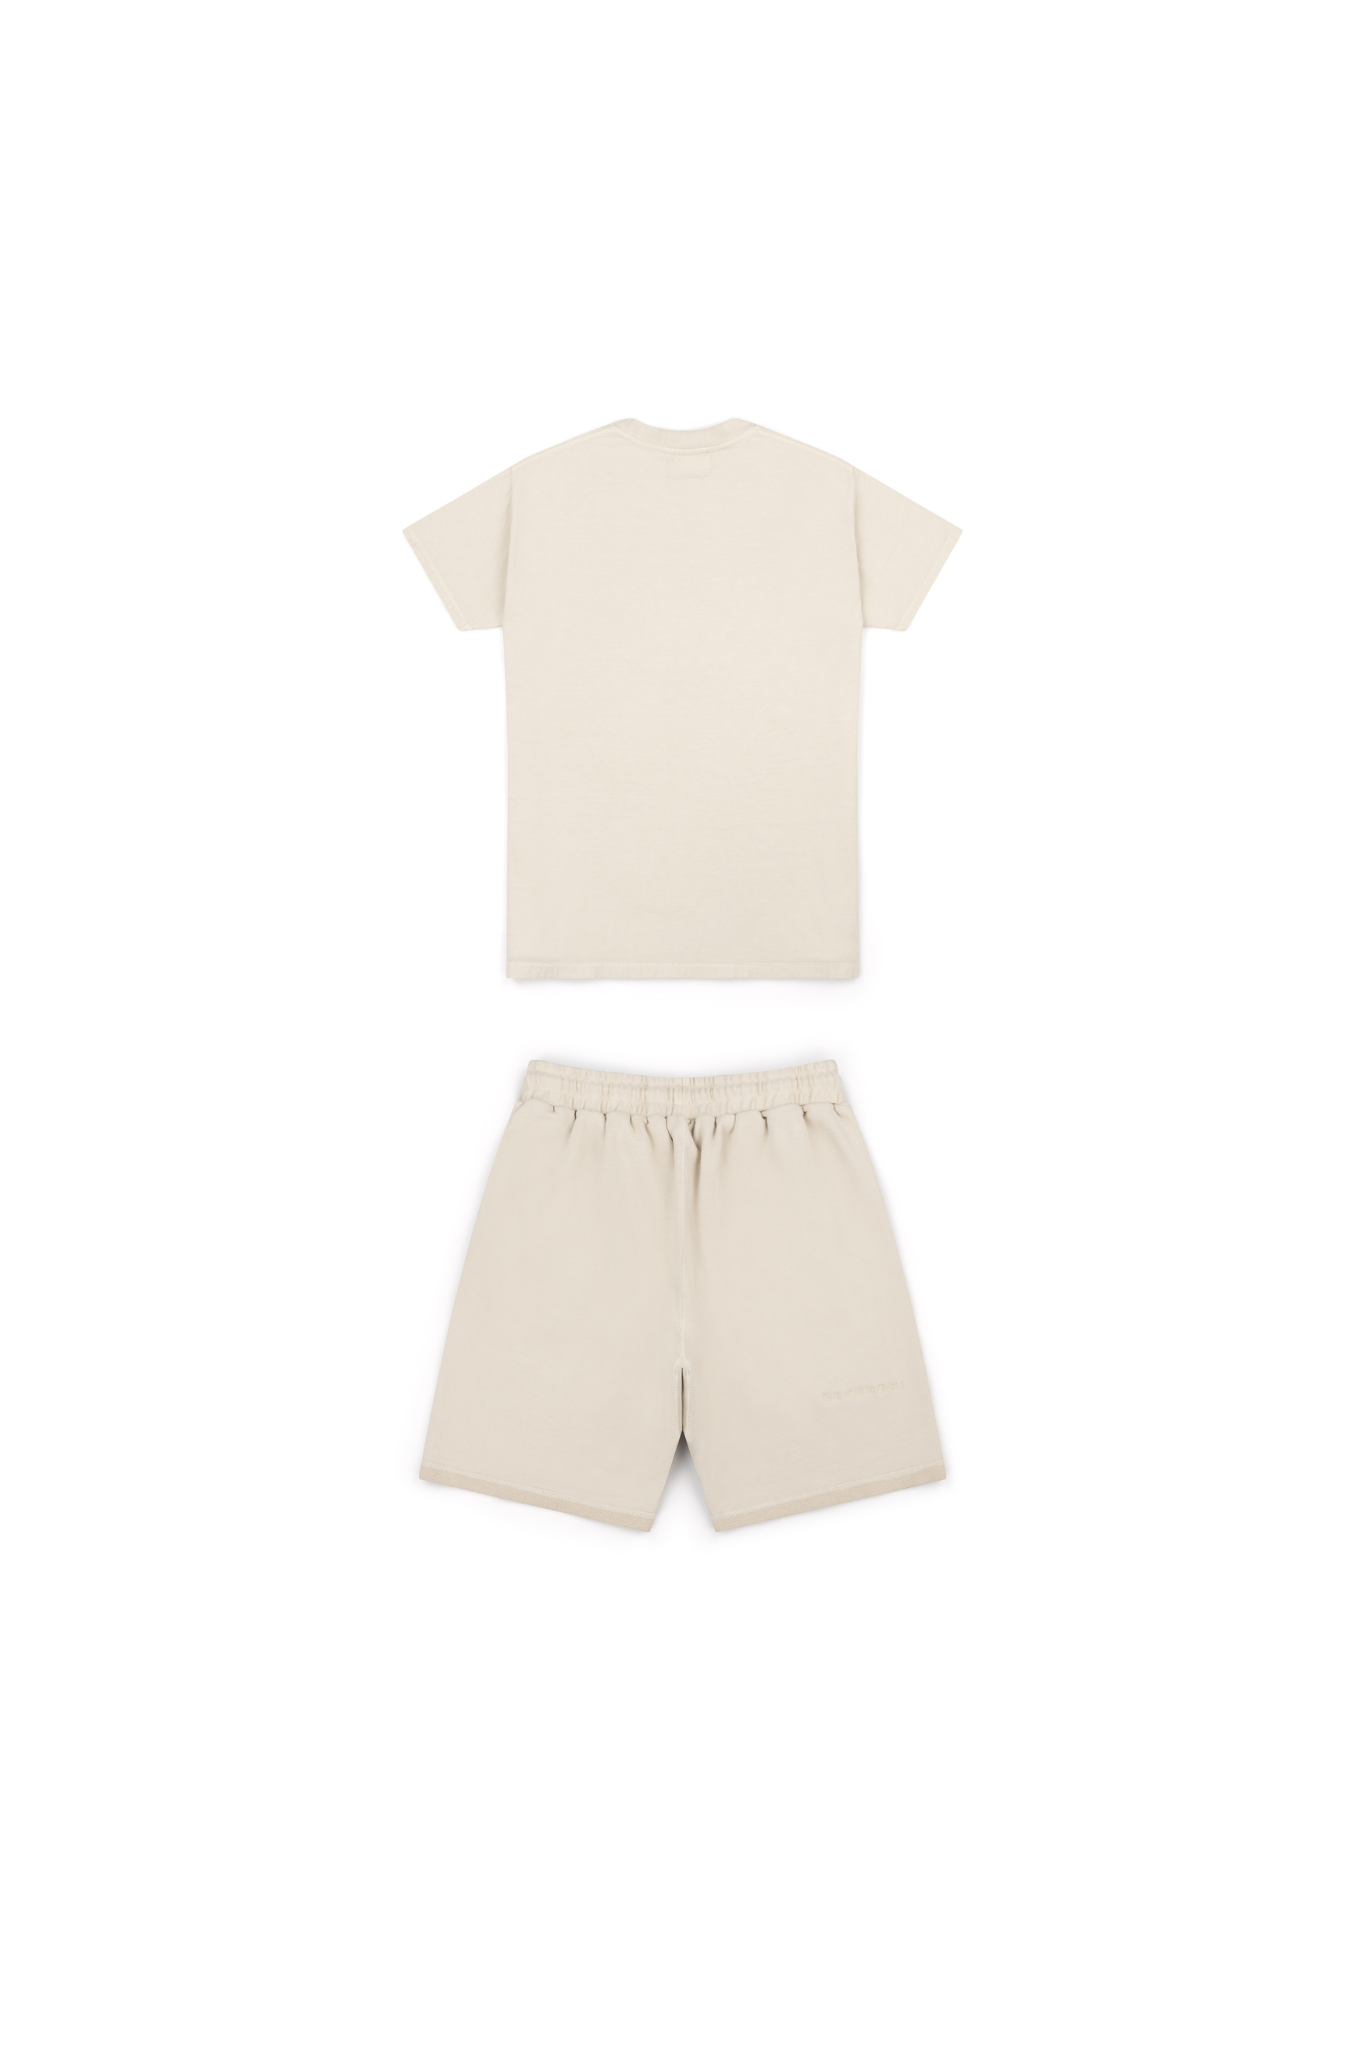 Real Artistic People - Heir Tee and Shorts Twin Set Vintage Off White